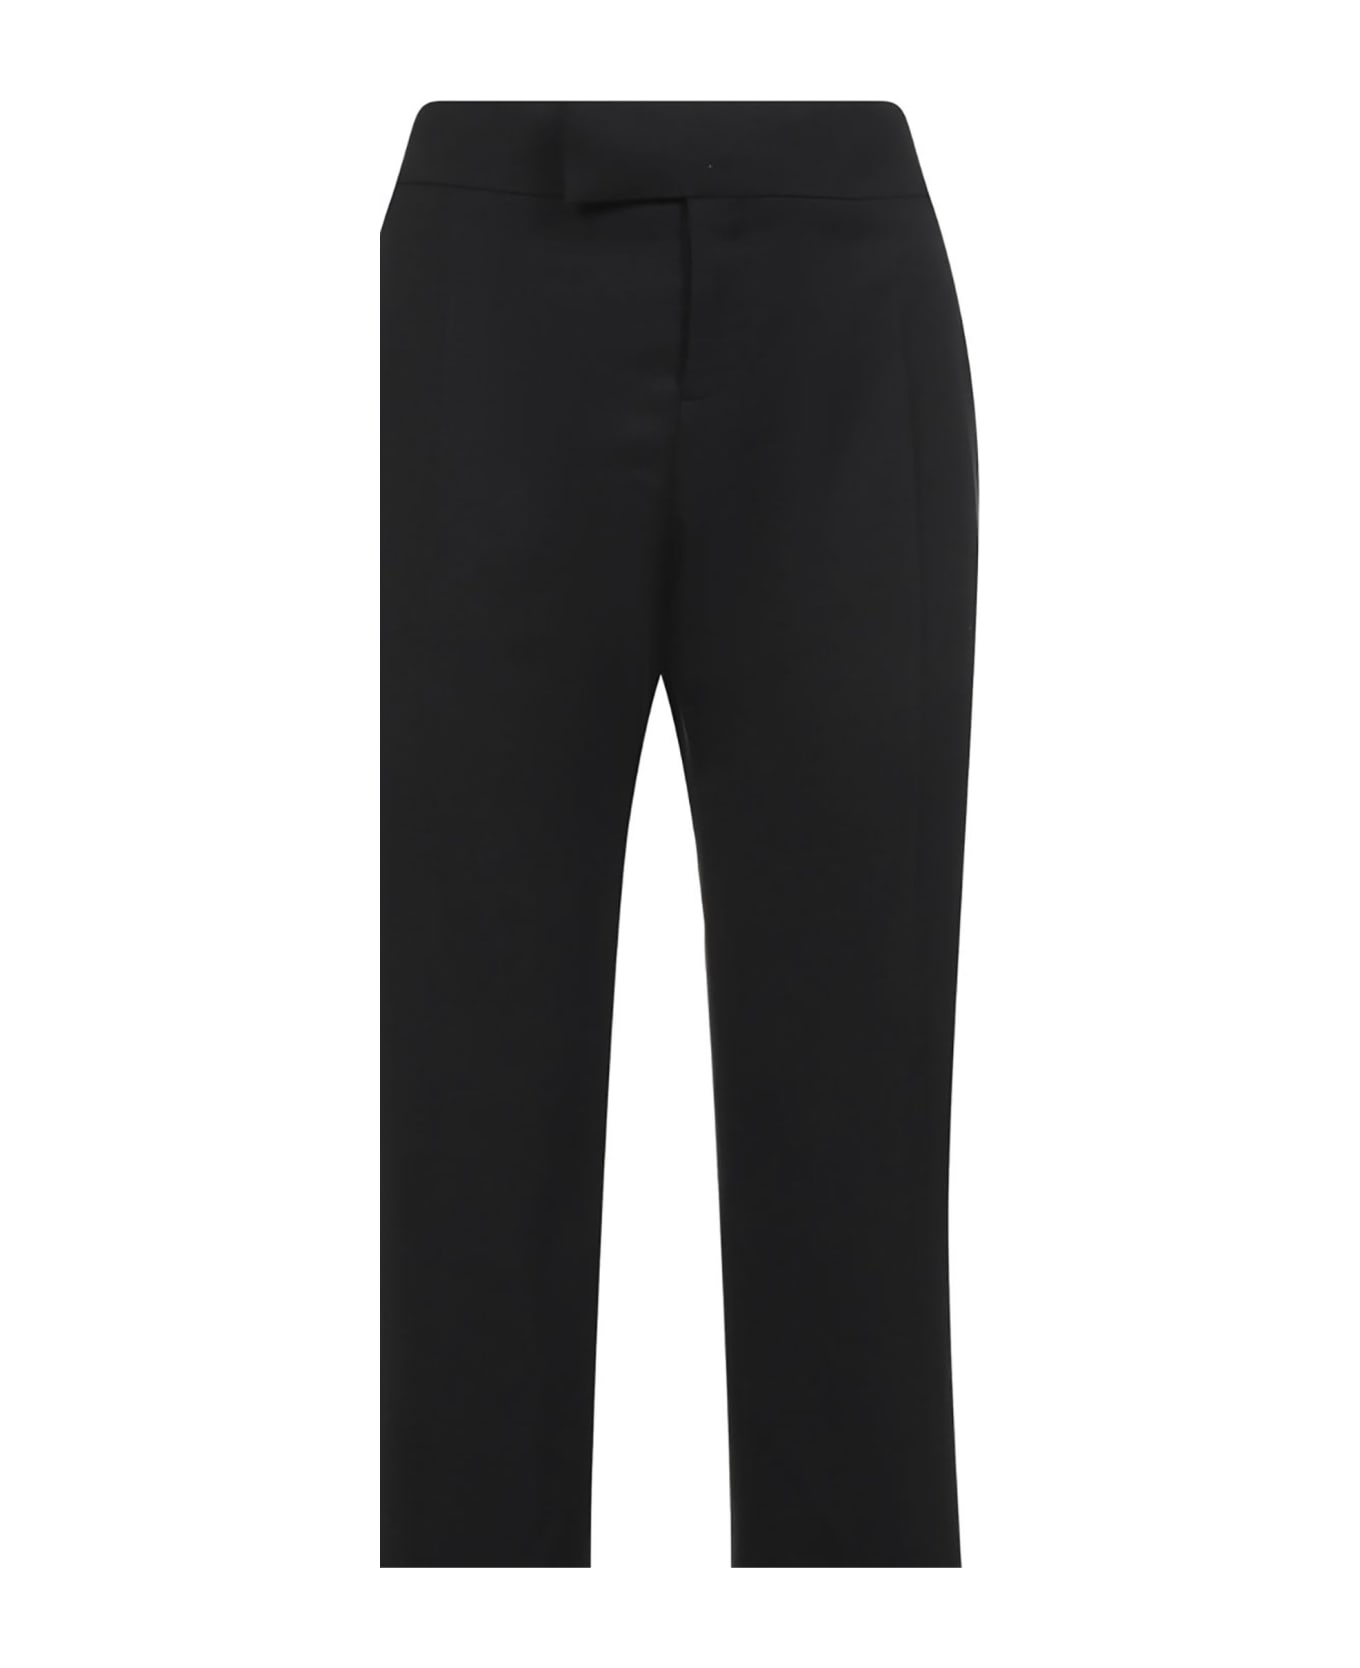 Tom Ford Black Flared Trousers In Grain De Poudre Tom Ford Woman - Black